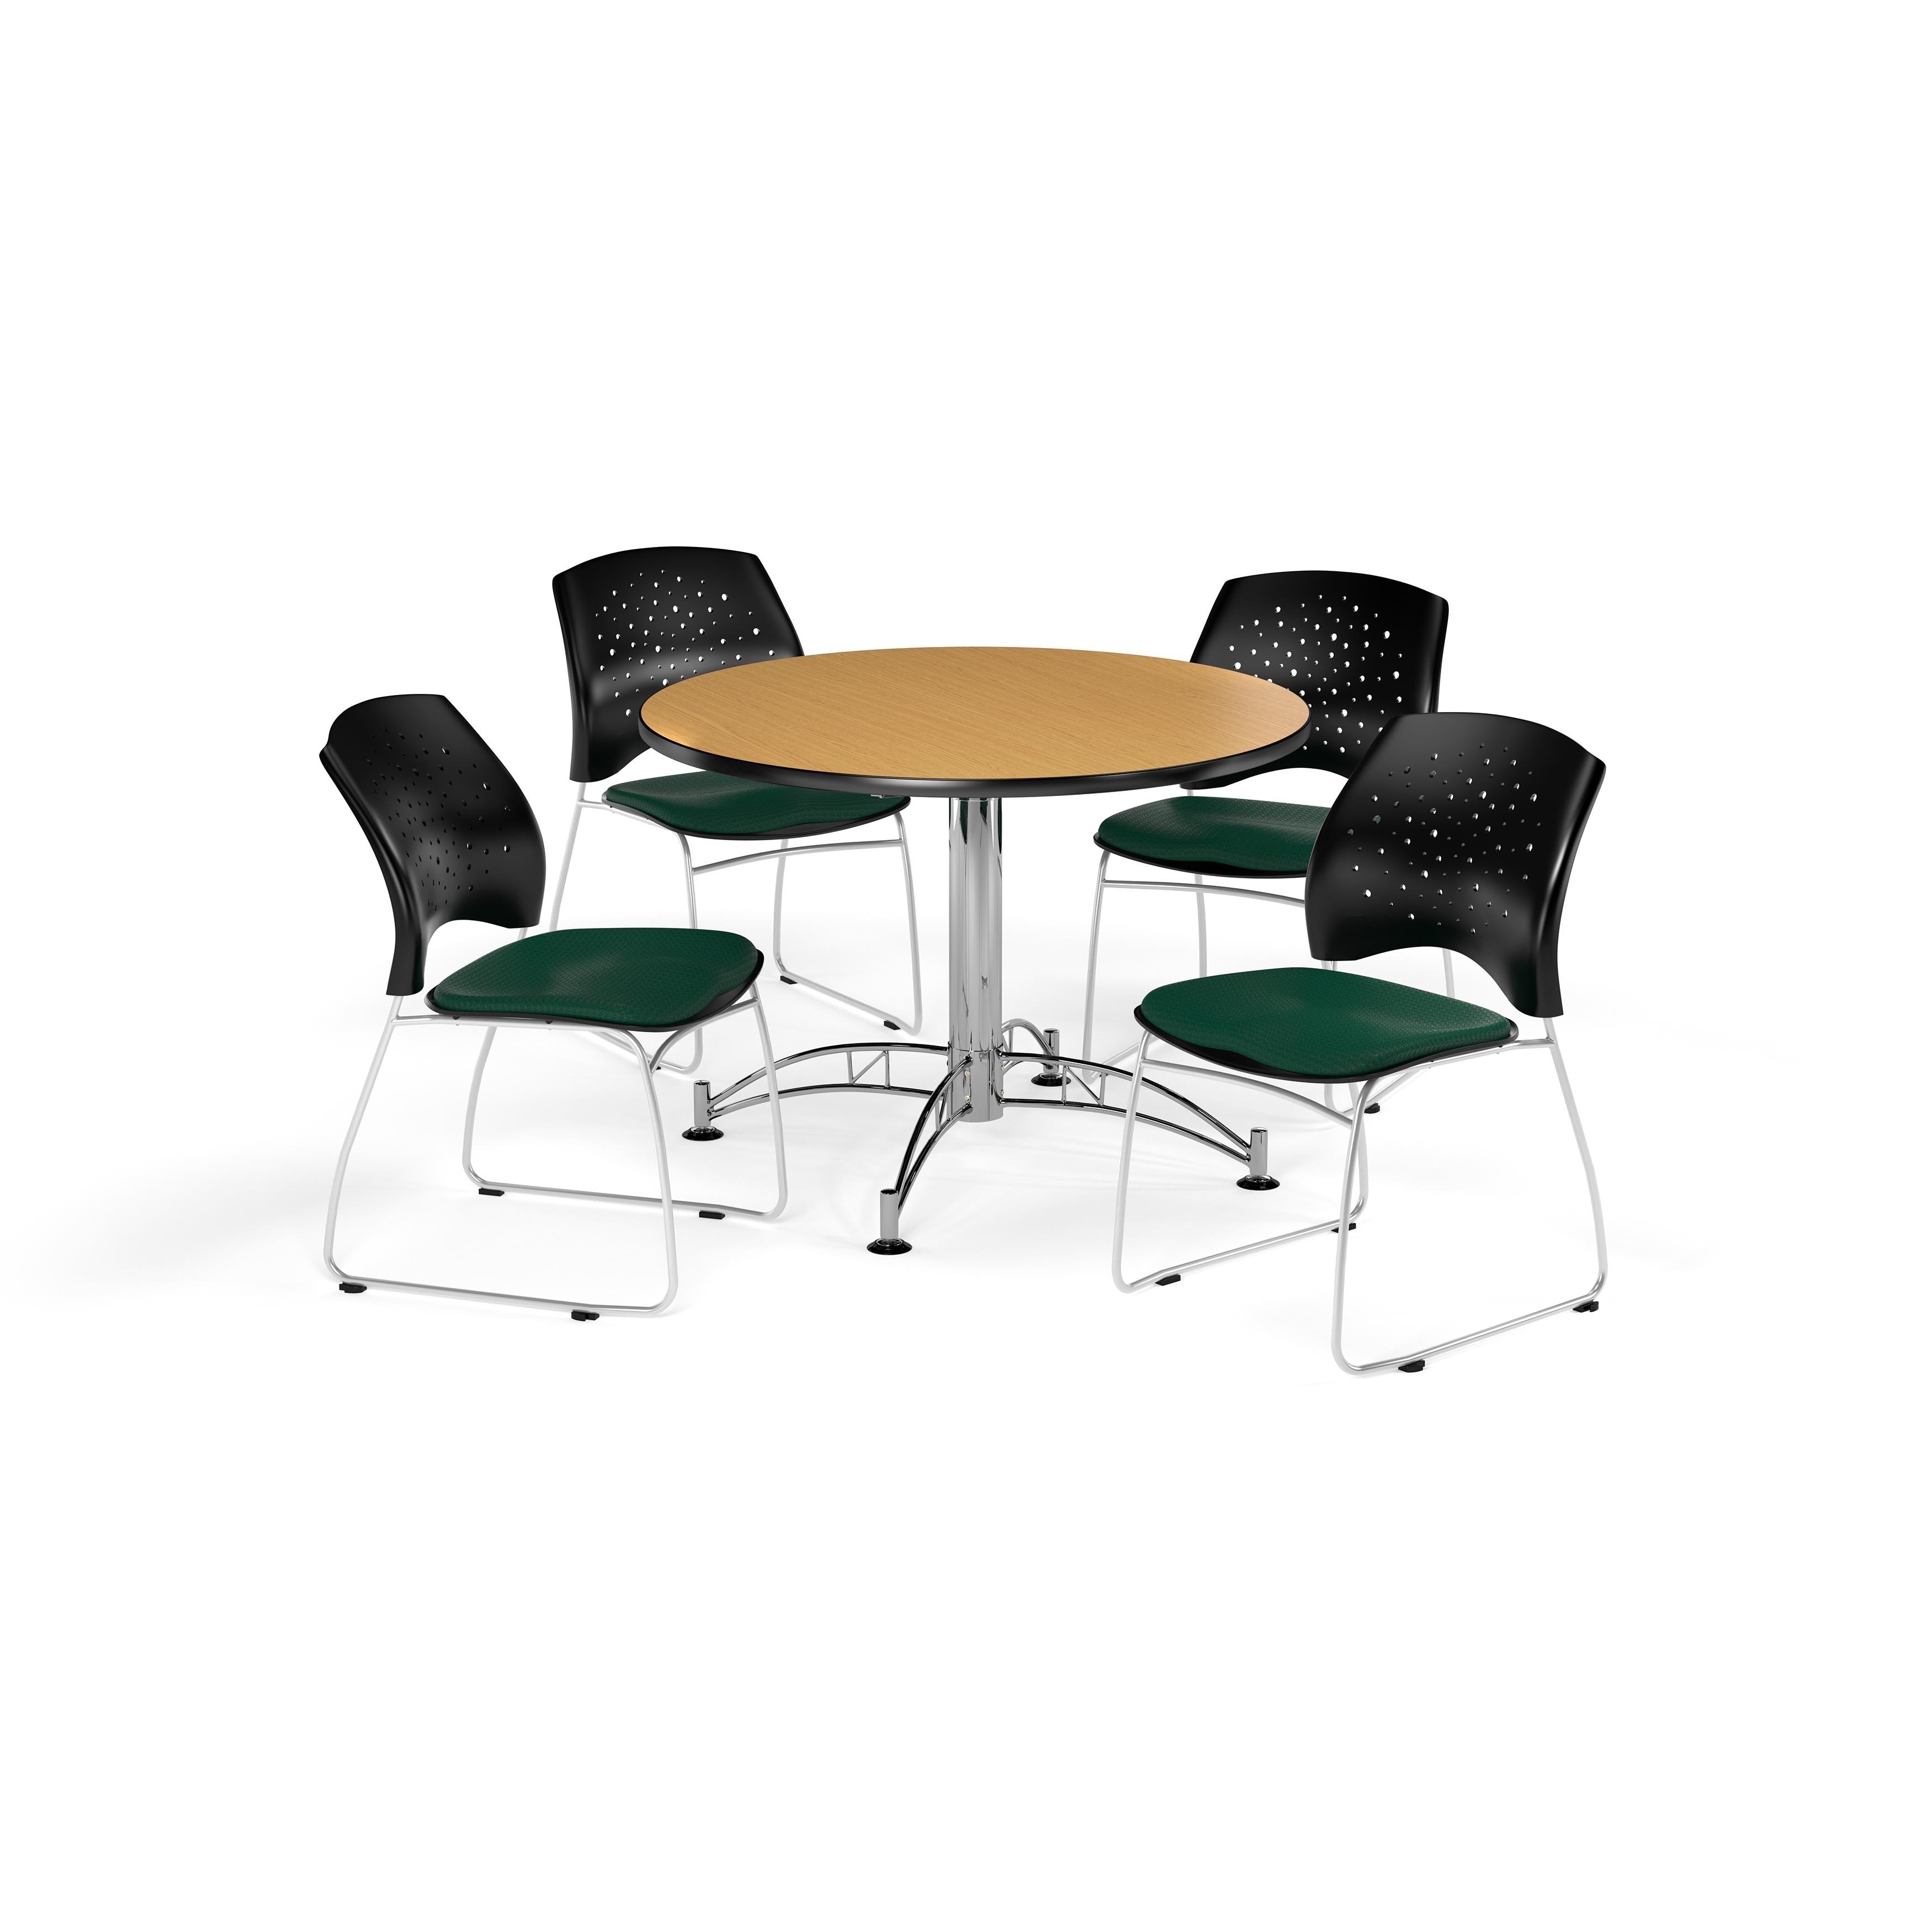 Details About Ofm Oak 36 Inch Round Break Room Table With 4 Star Chairs